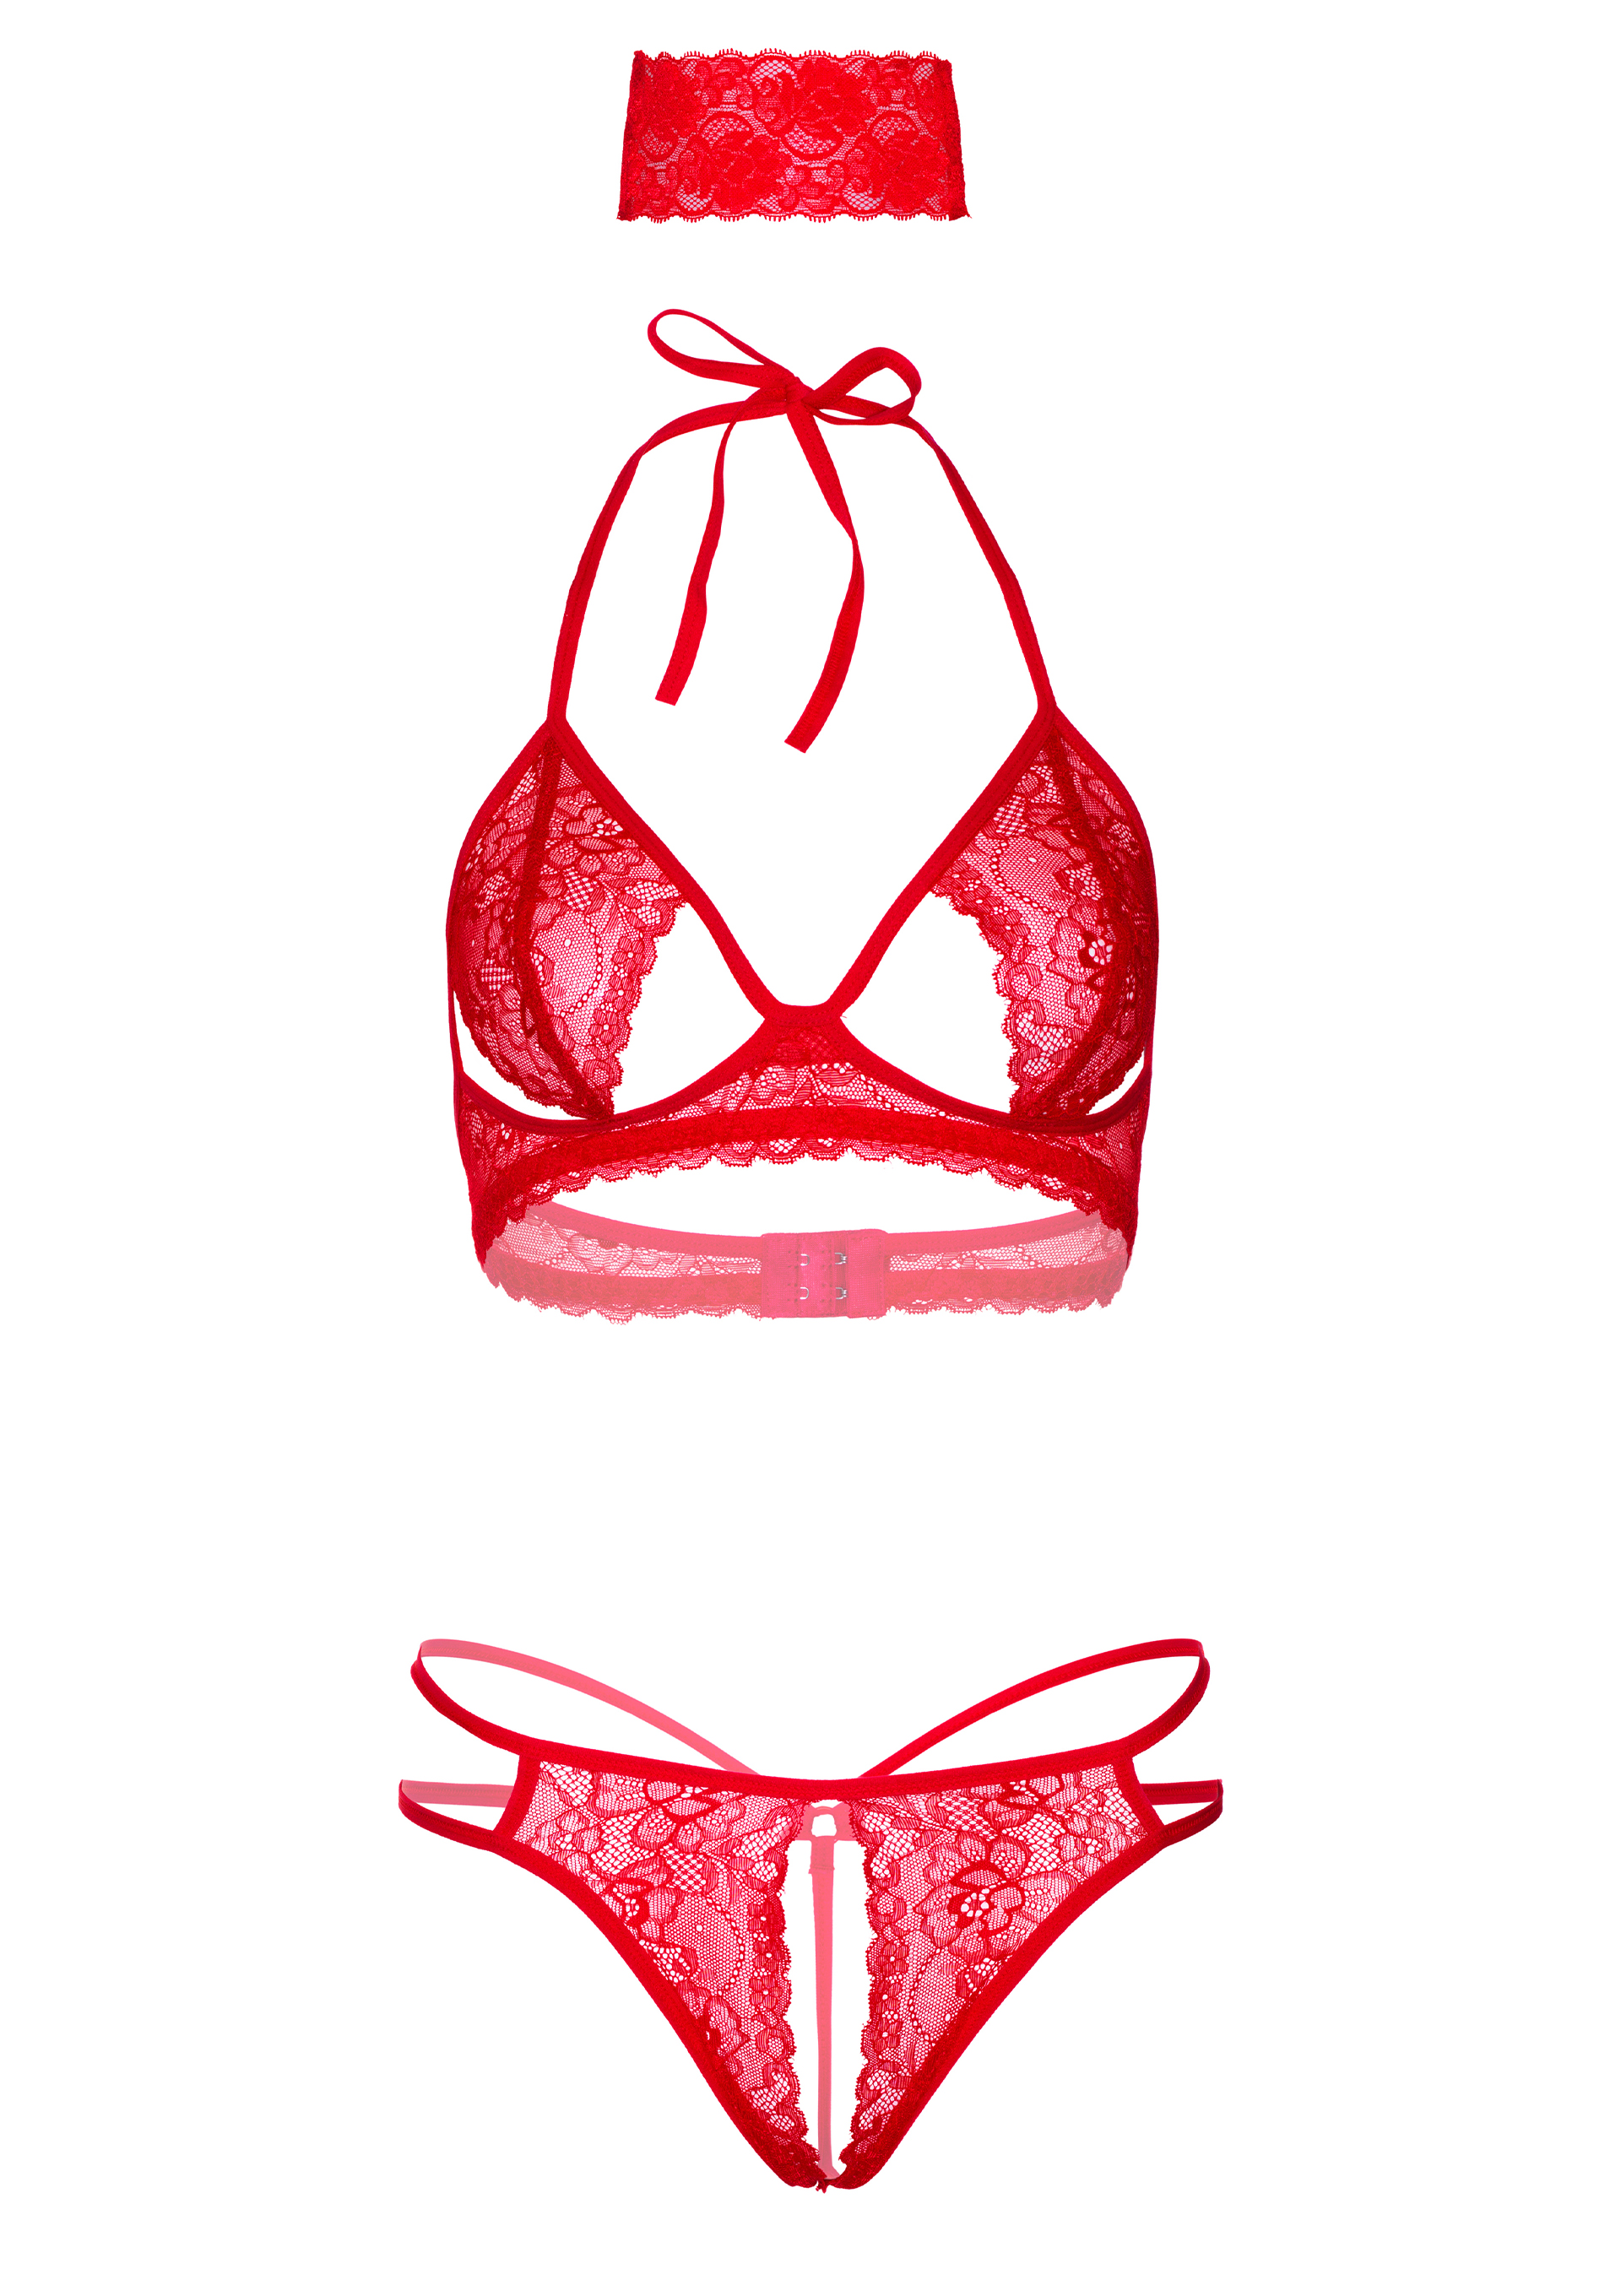 Daring - Daring Peek-A-Boo Bra Set with G-String and Blindfold